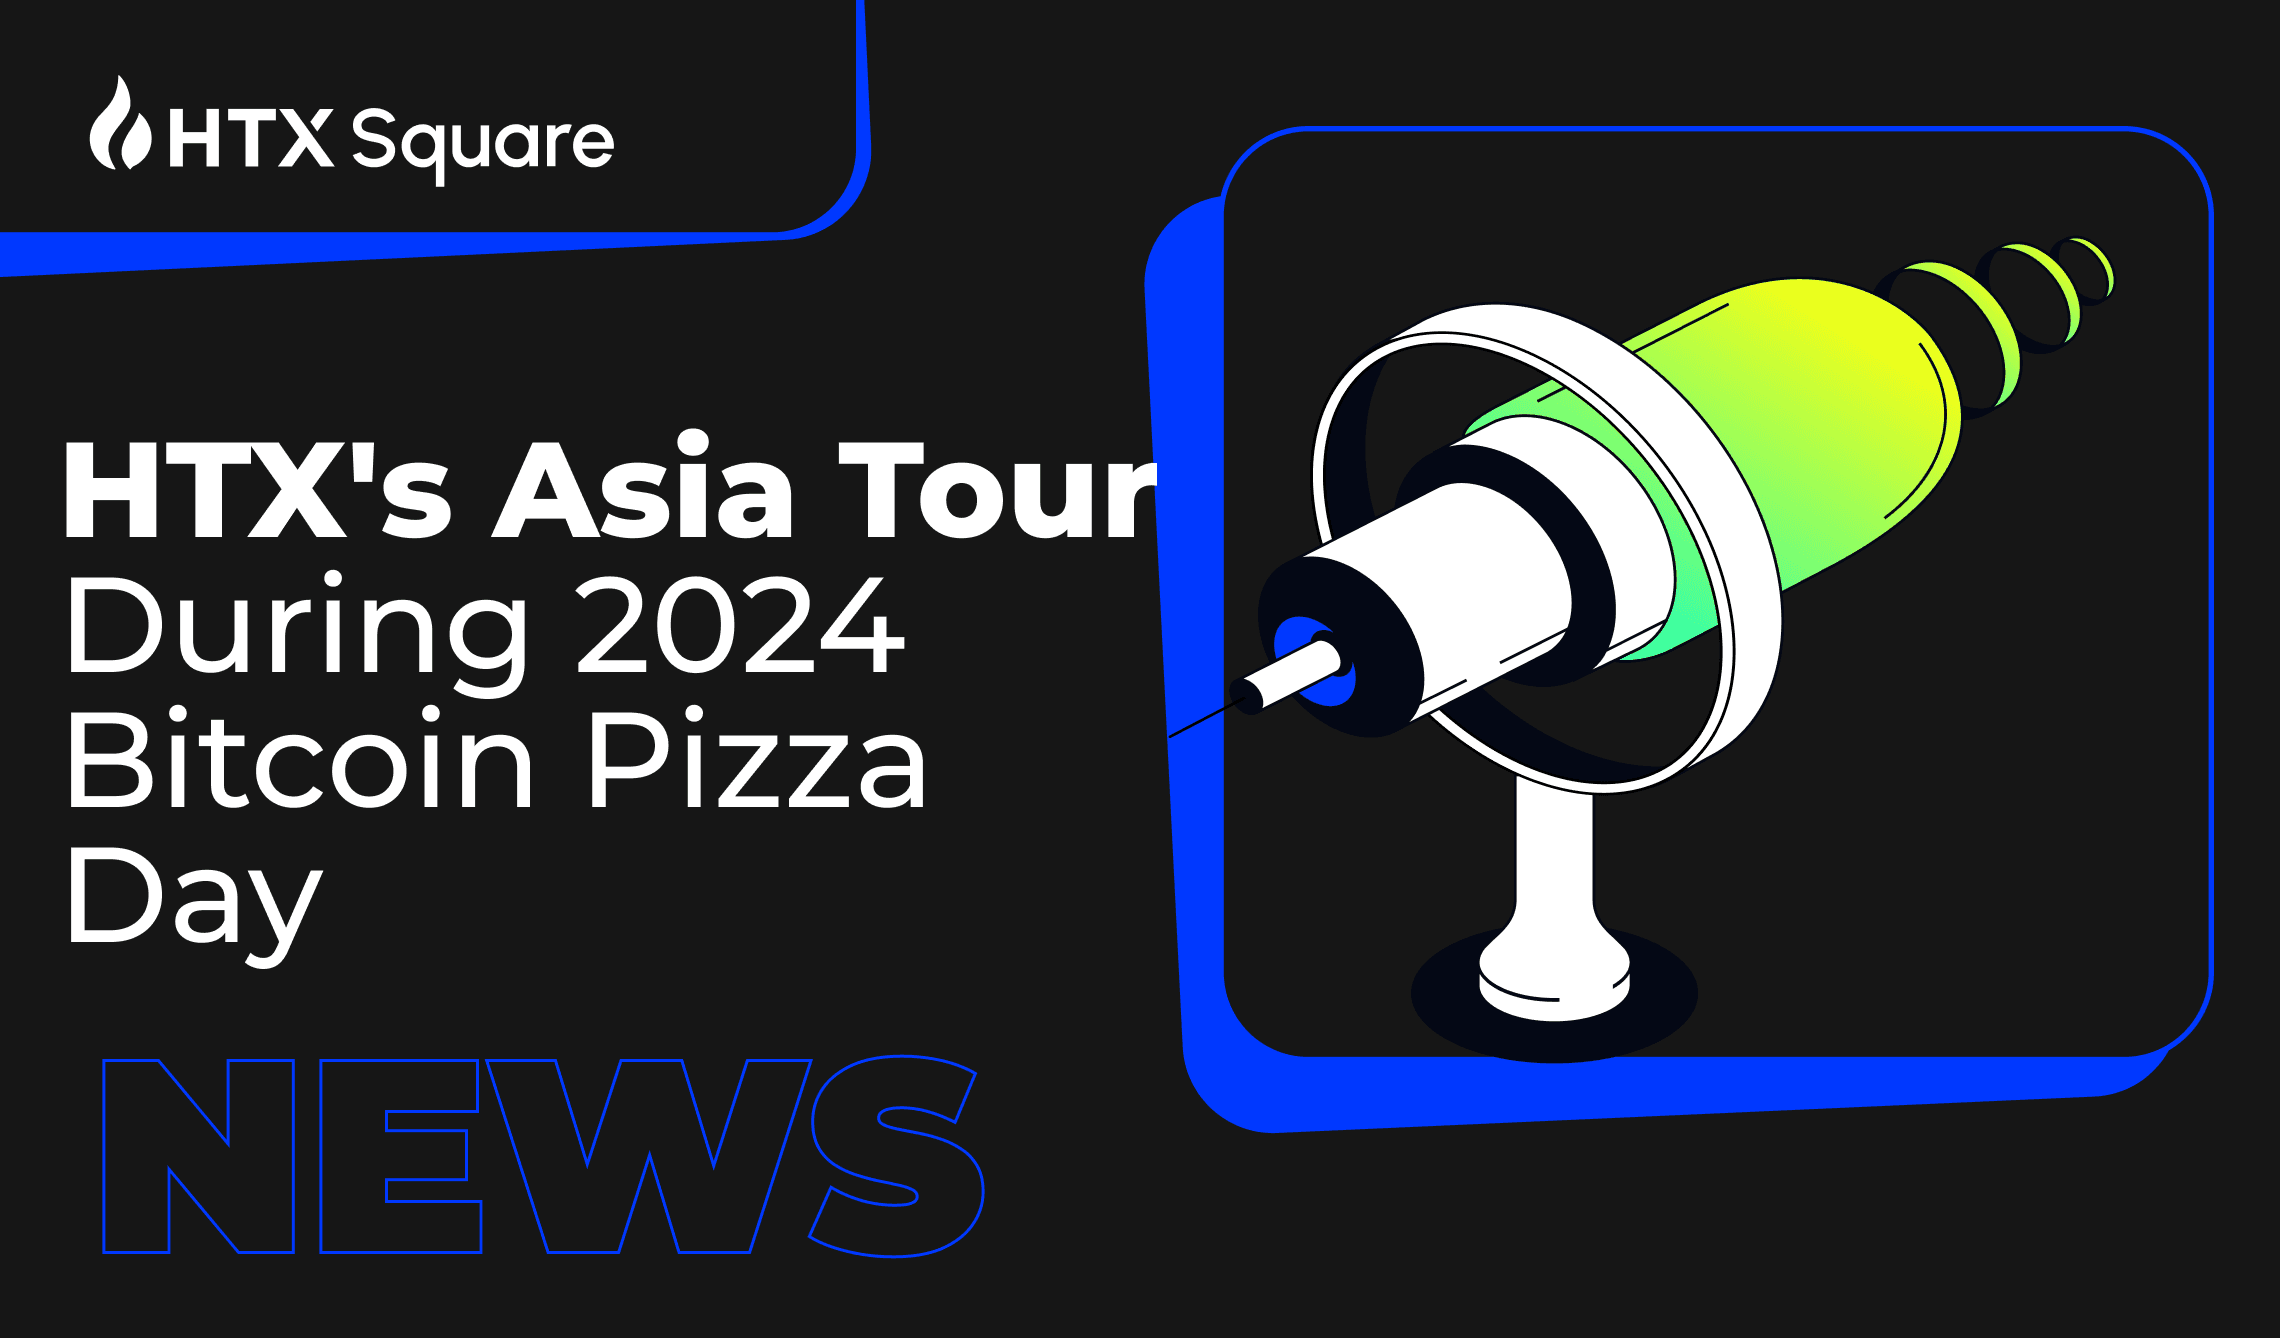 HTX’s Asia Tour During 2024 Bitcoin Pizza Day: A Carnival Connecting the Crypto Community